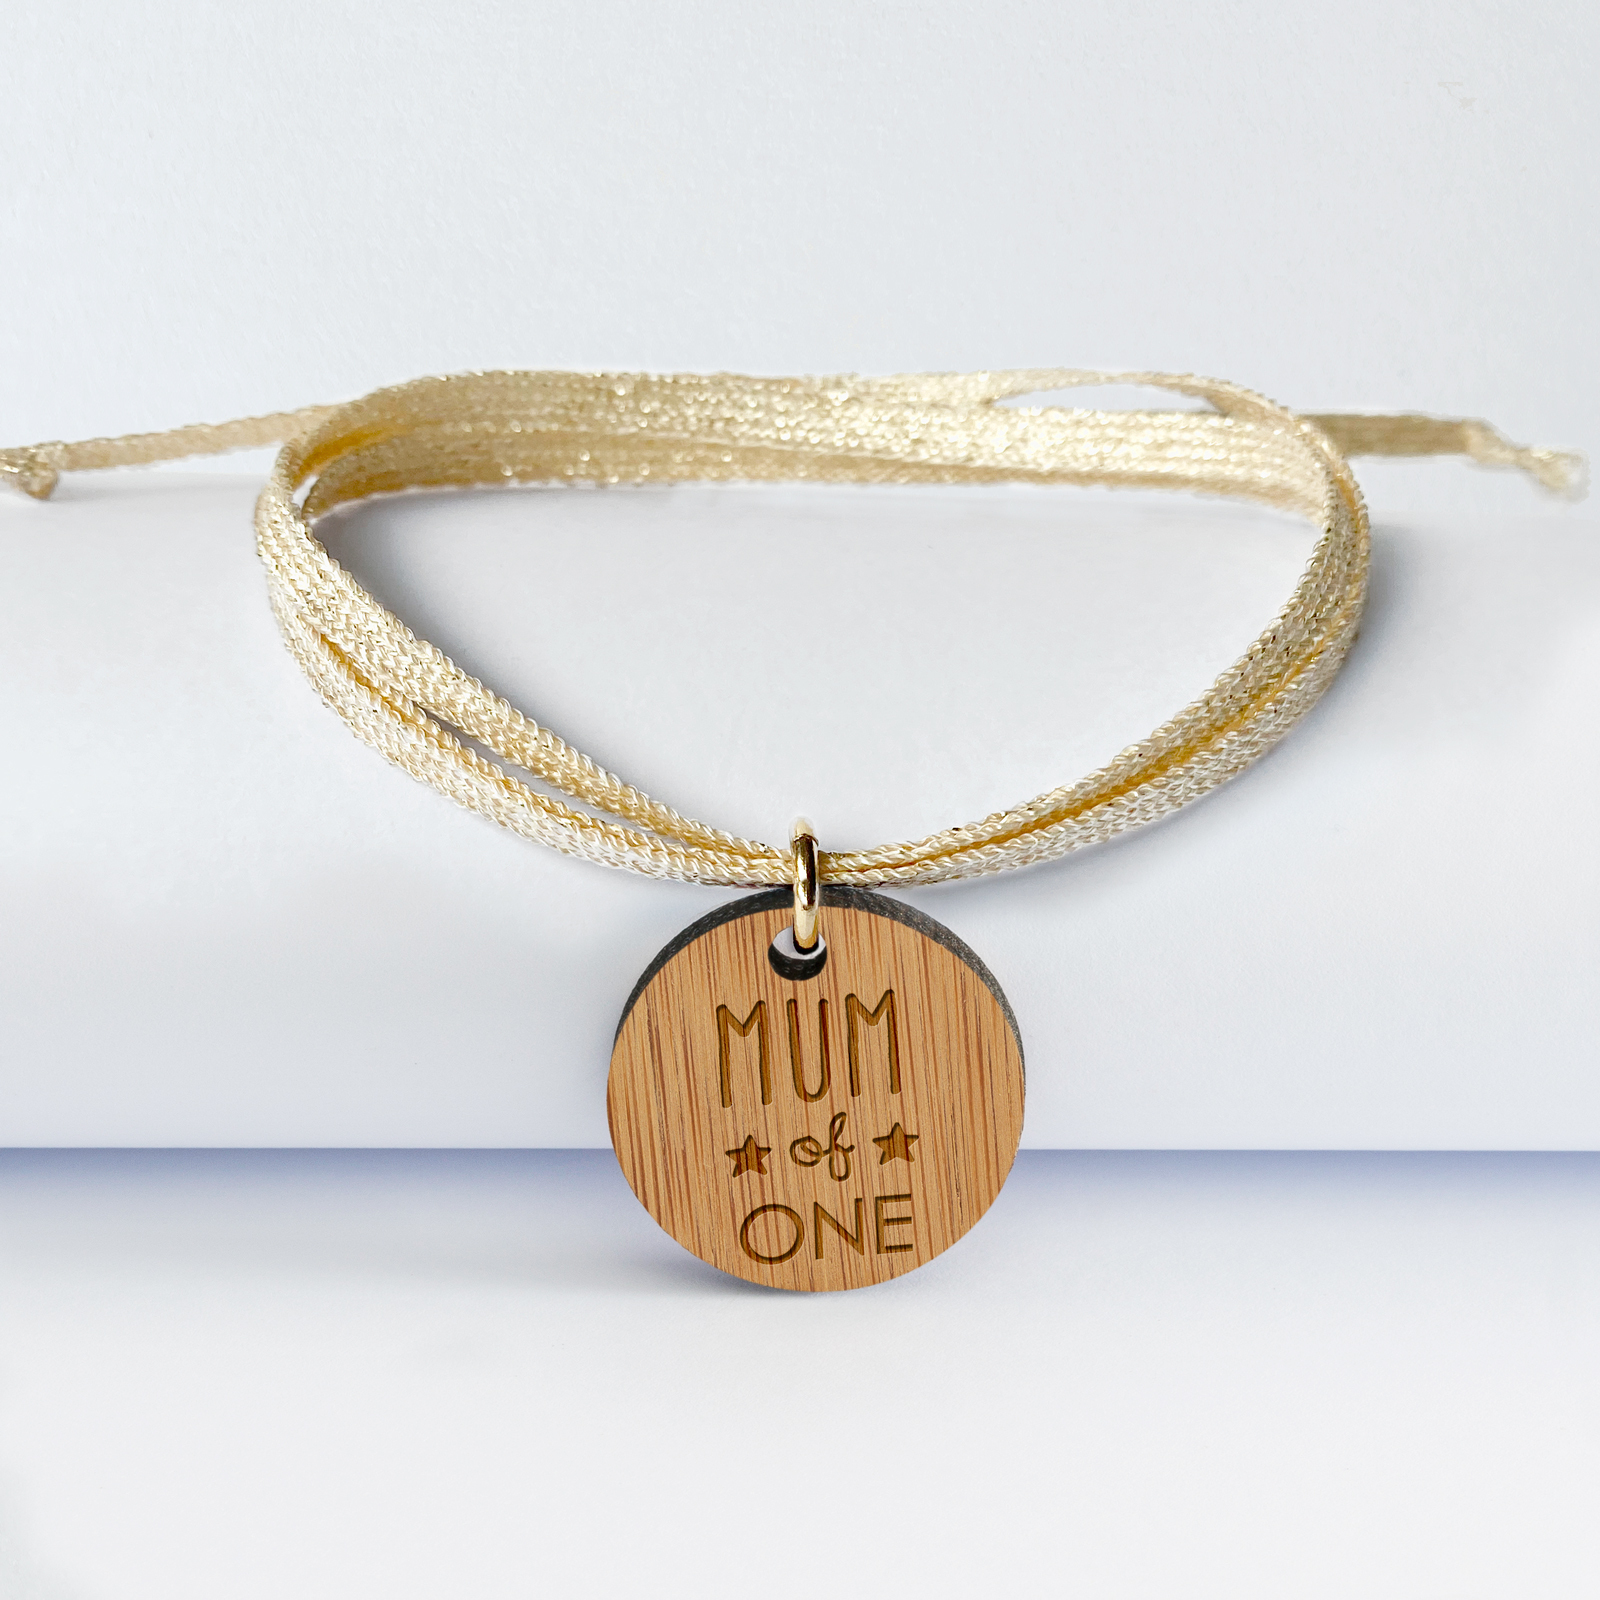 Personalised 3 turn bracelet engraved medal with round sleeper wood 20 mm - special edition "Mum of one"